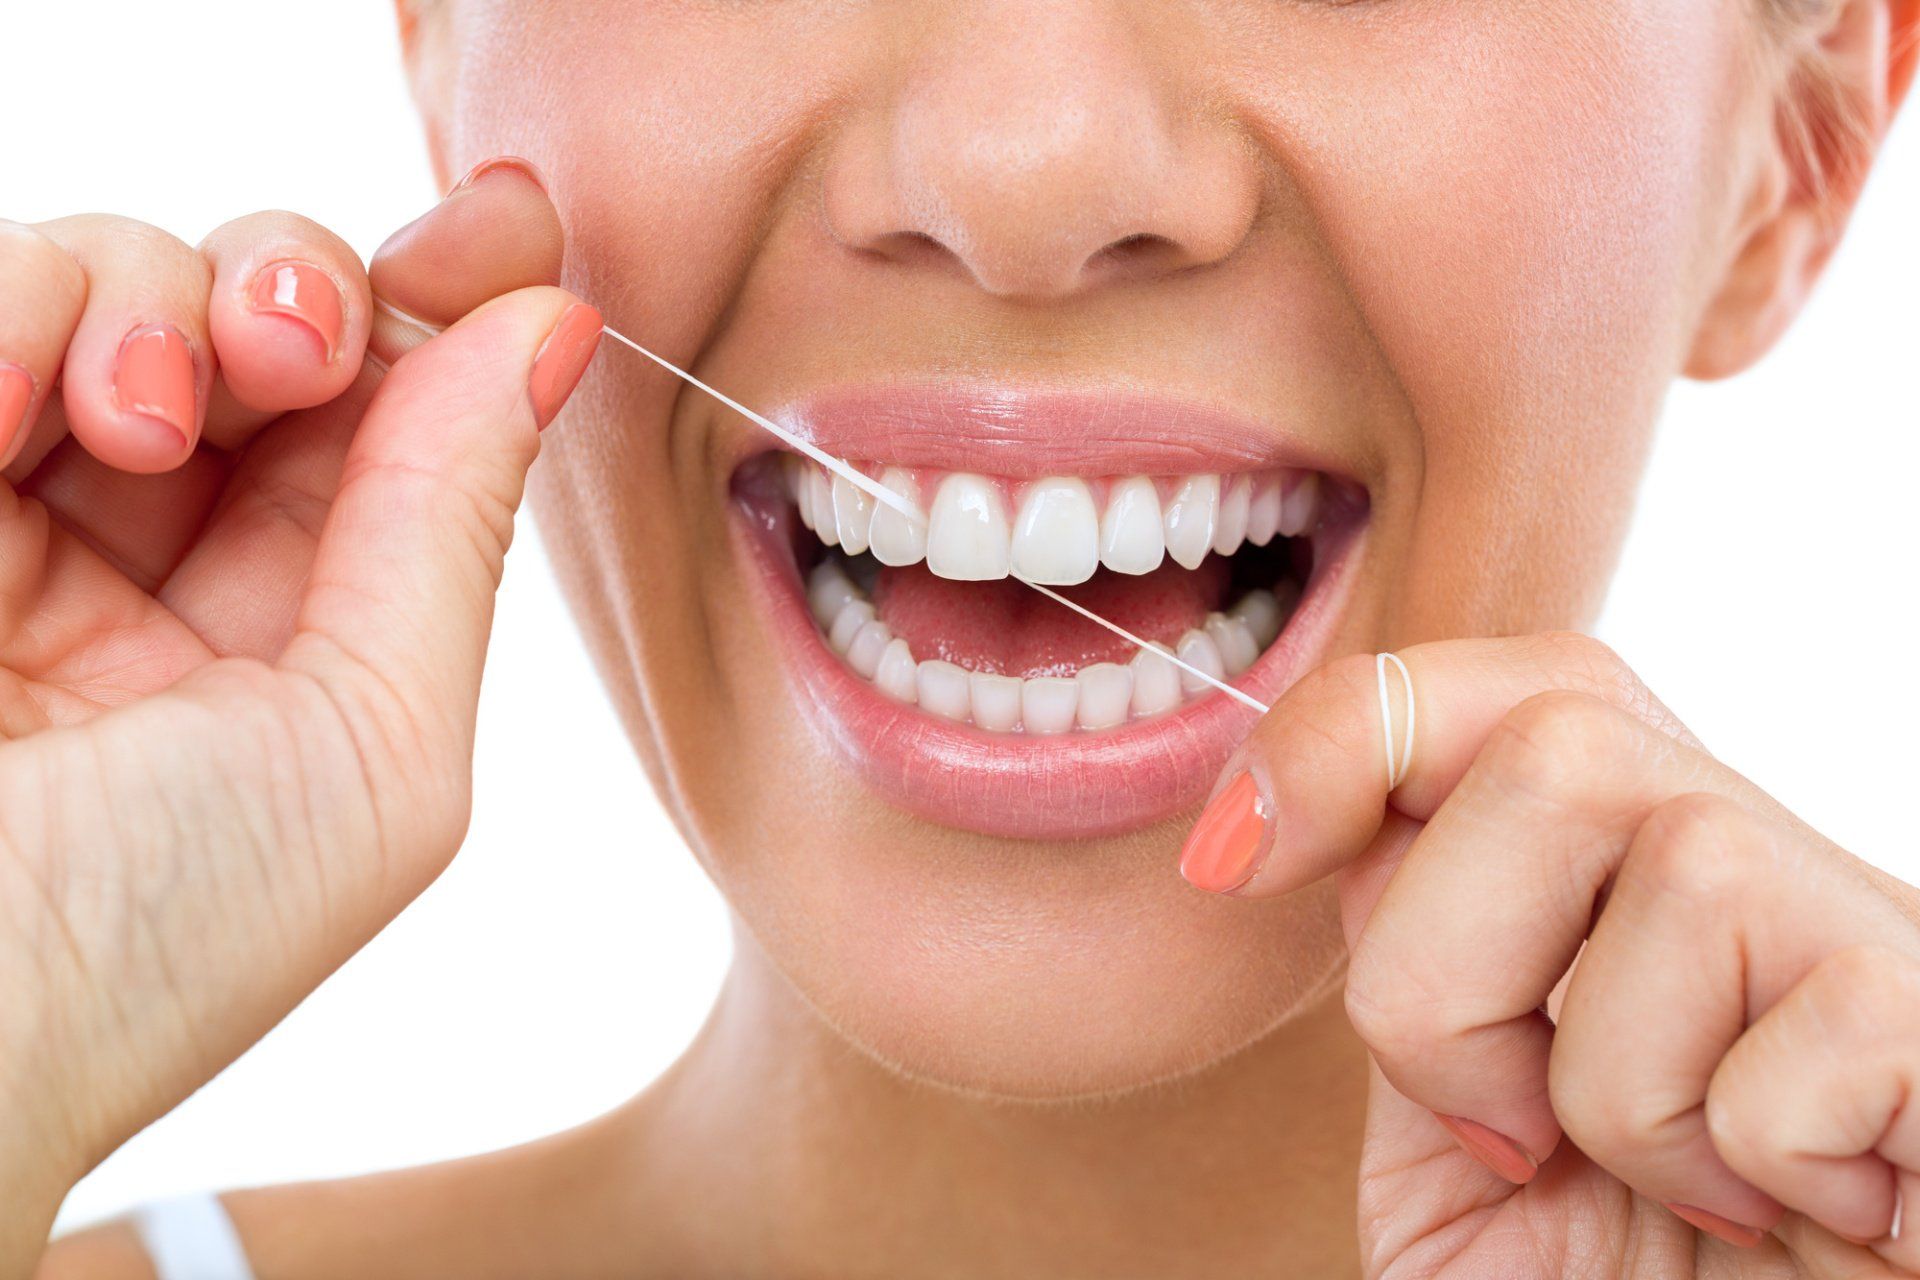 a woman is flossing her teeth with a dental floss